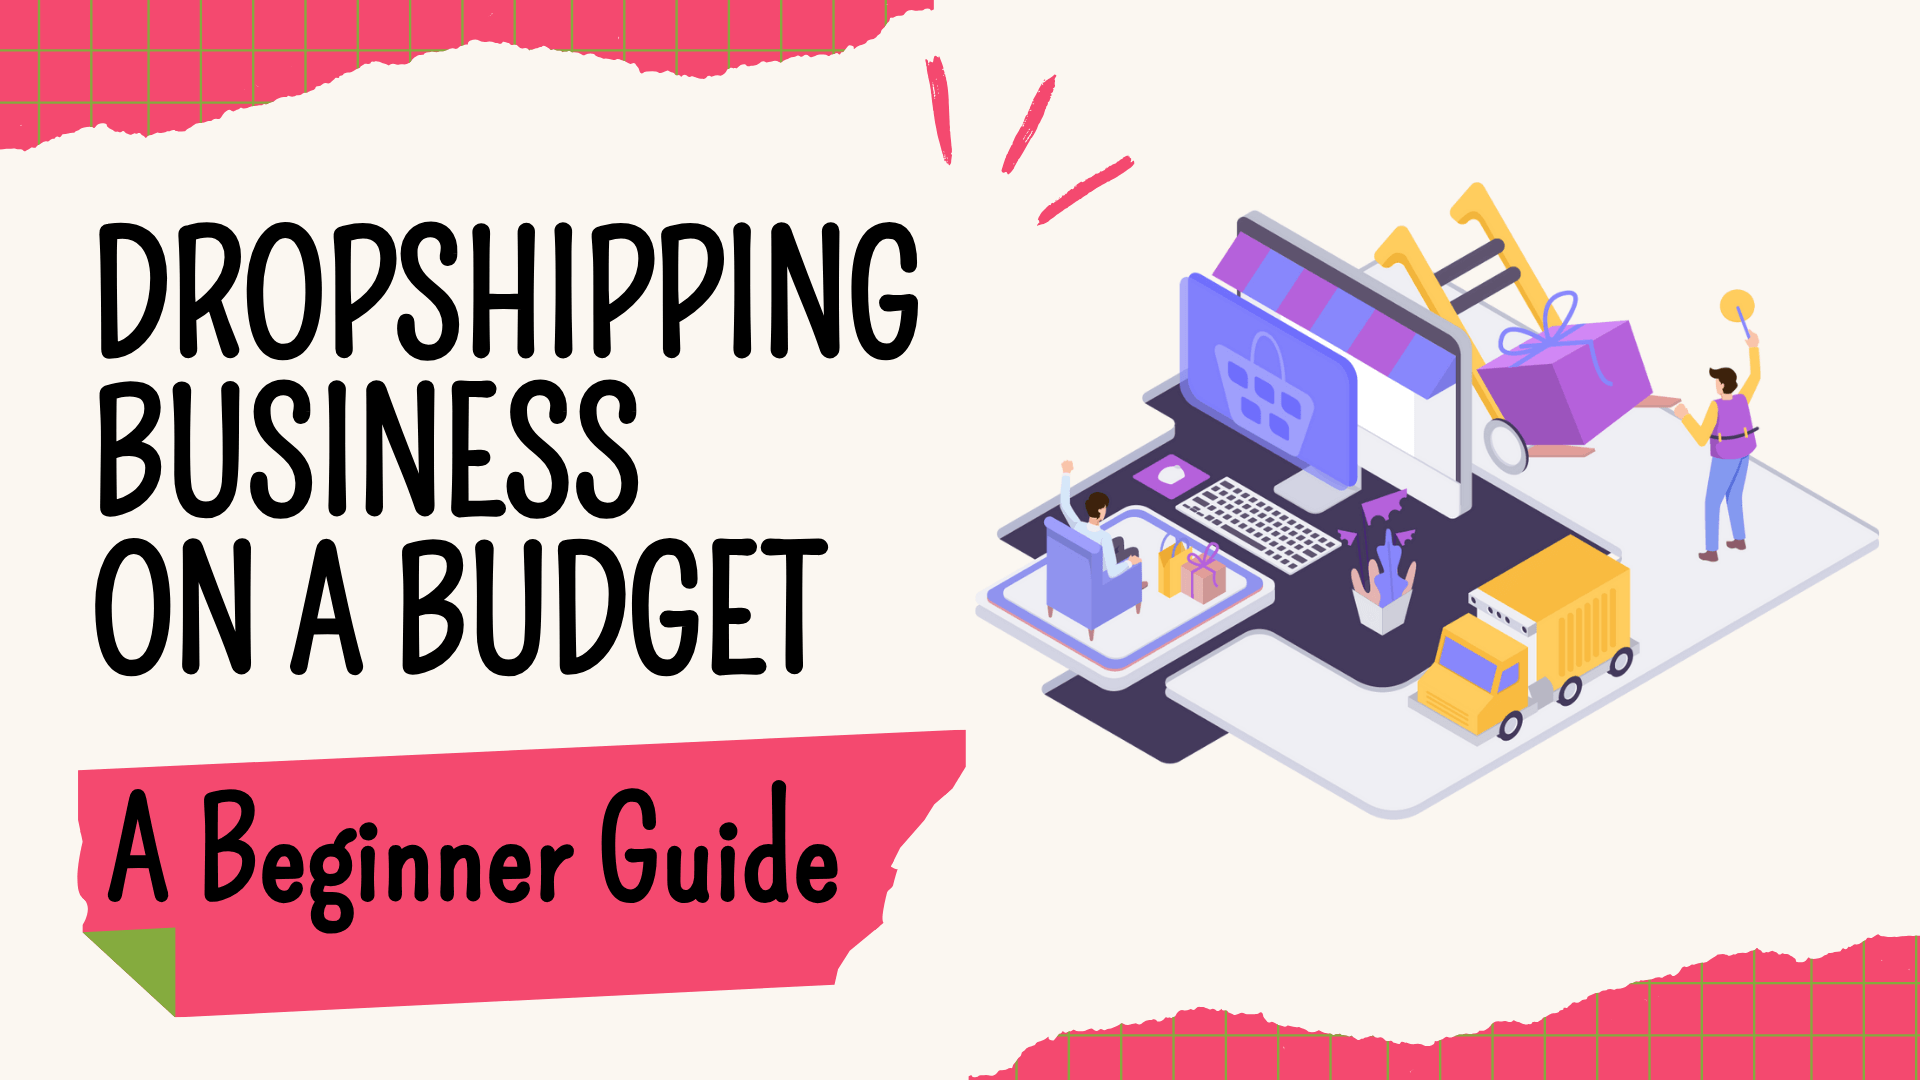 Dropshipping Business on a Budget